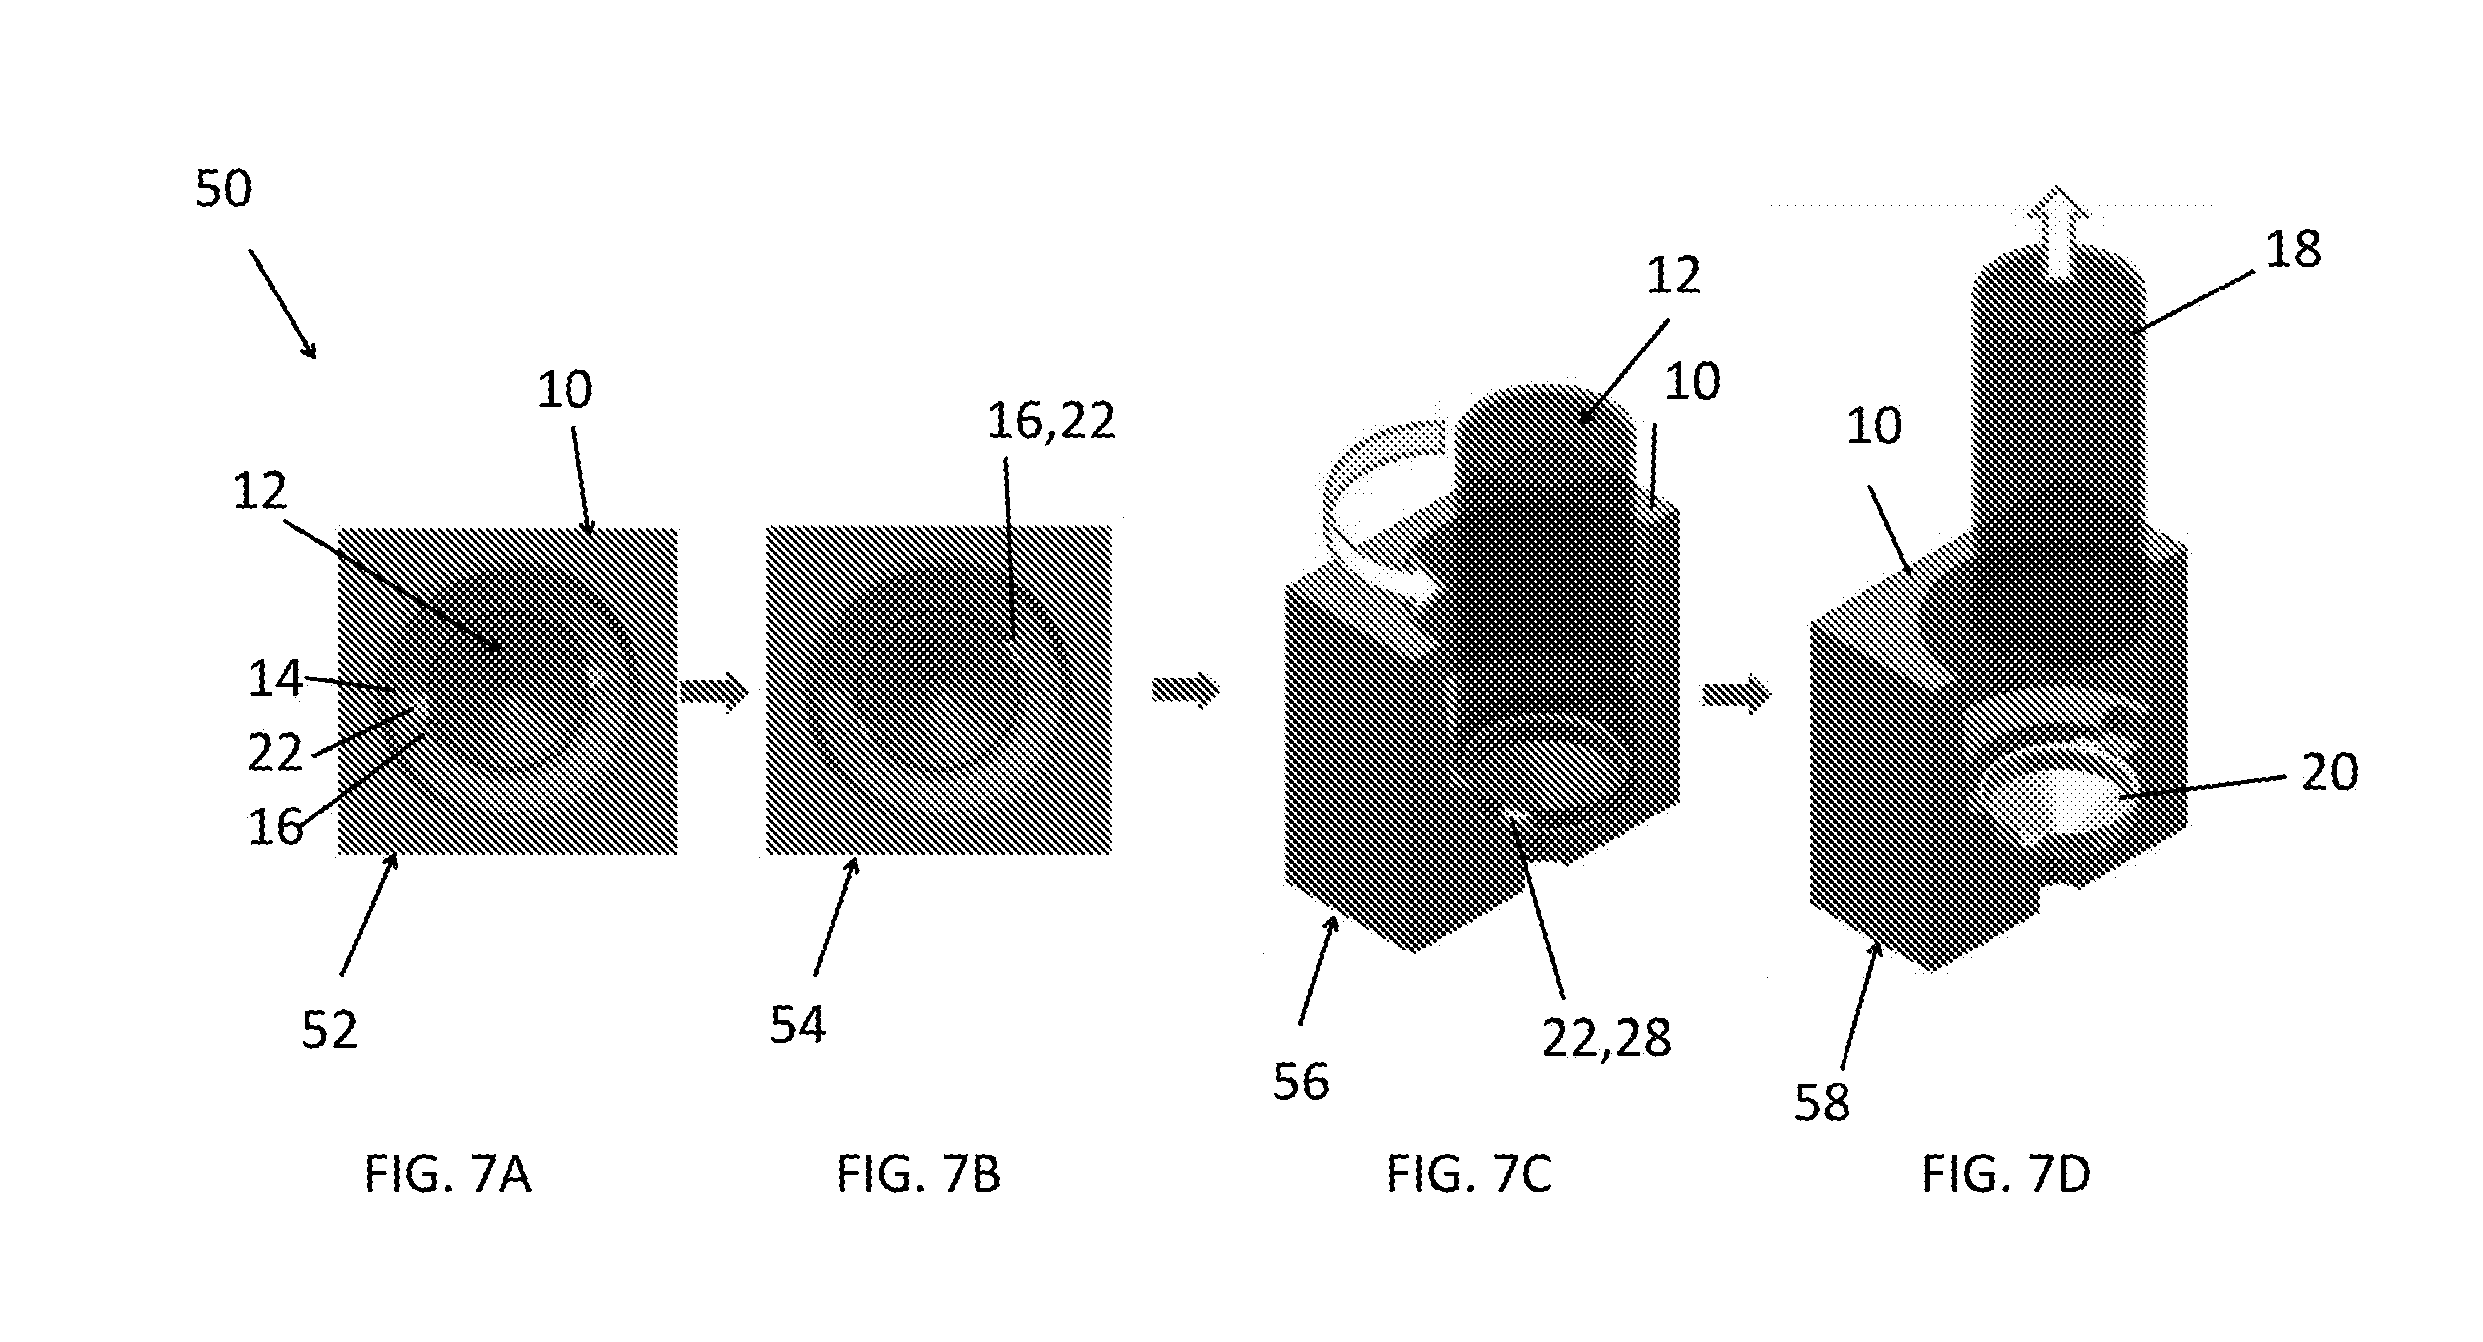 Exothermic reaction welding molds, weld-metal containing cartridges for such molds, and methods of use